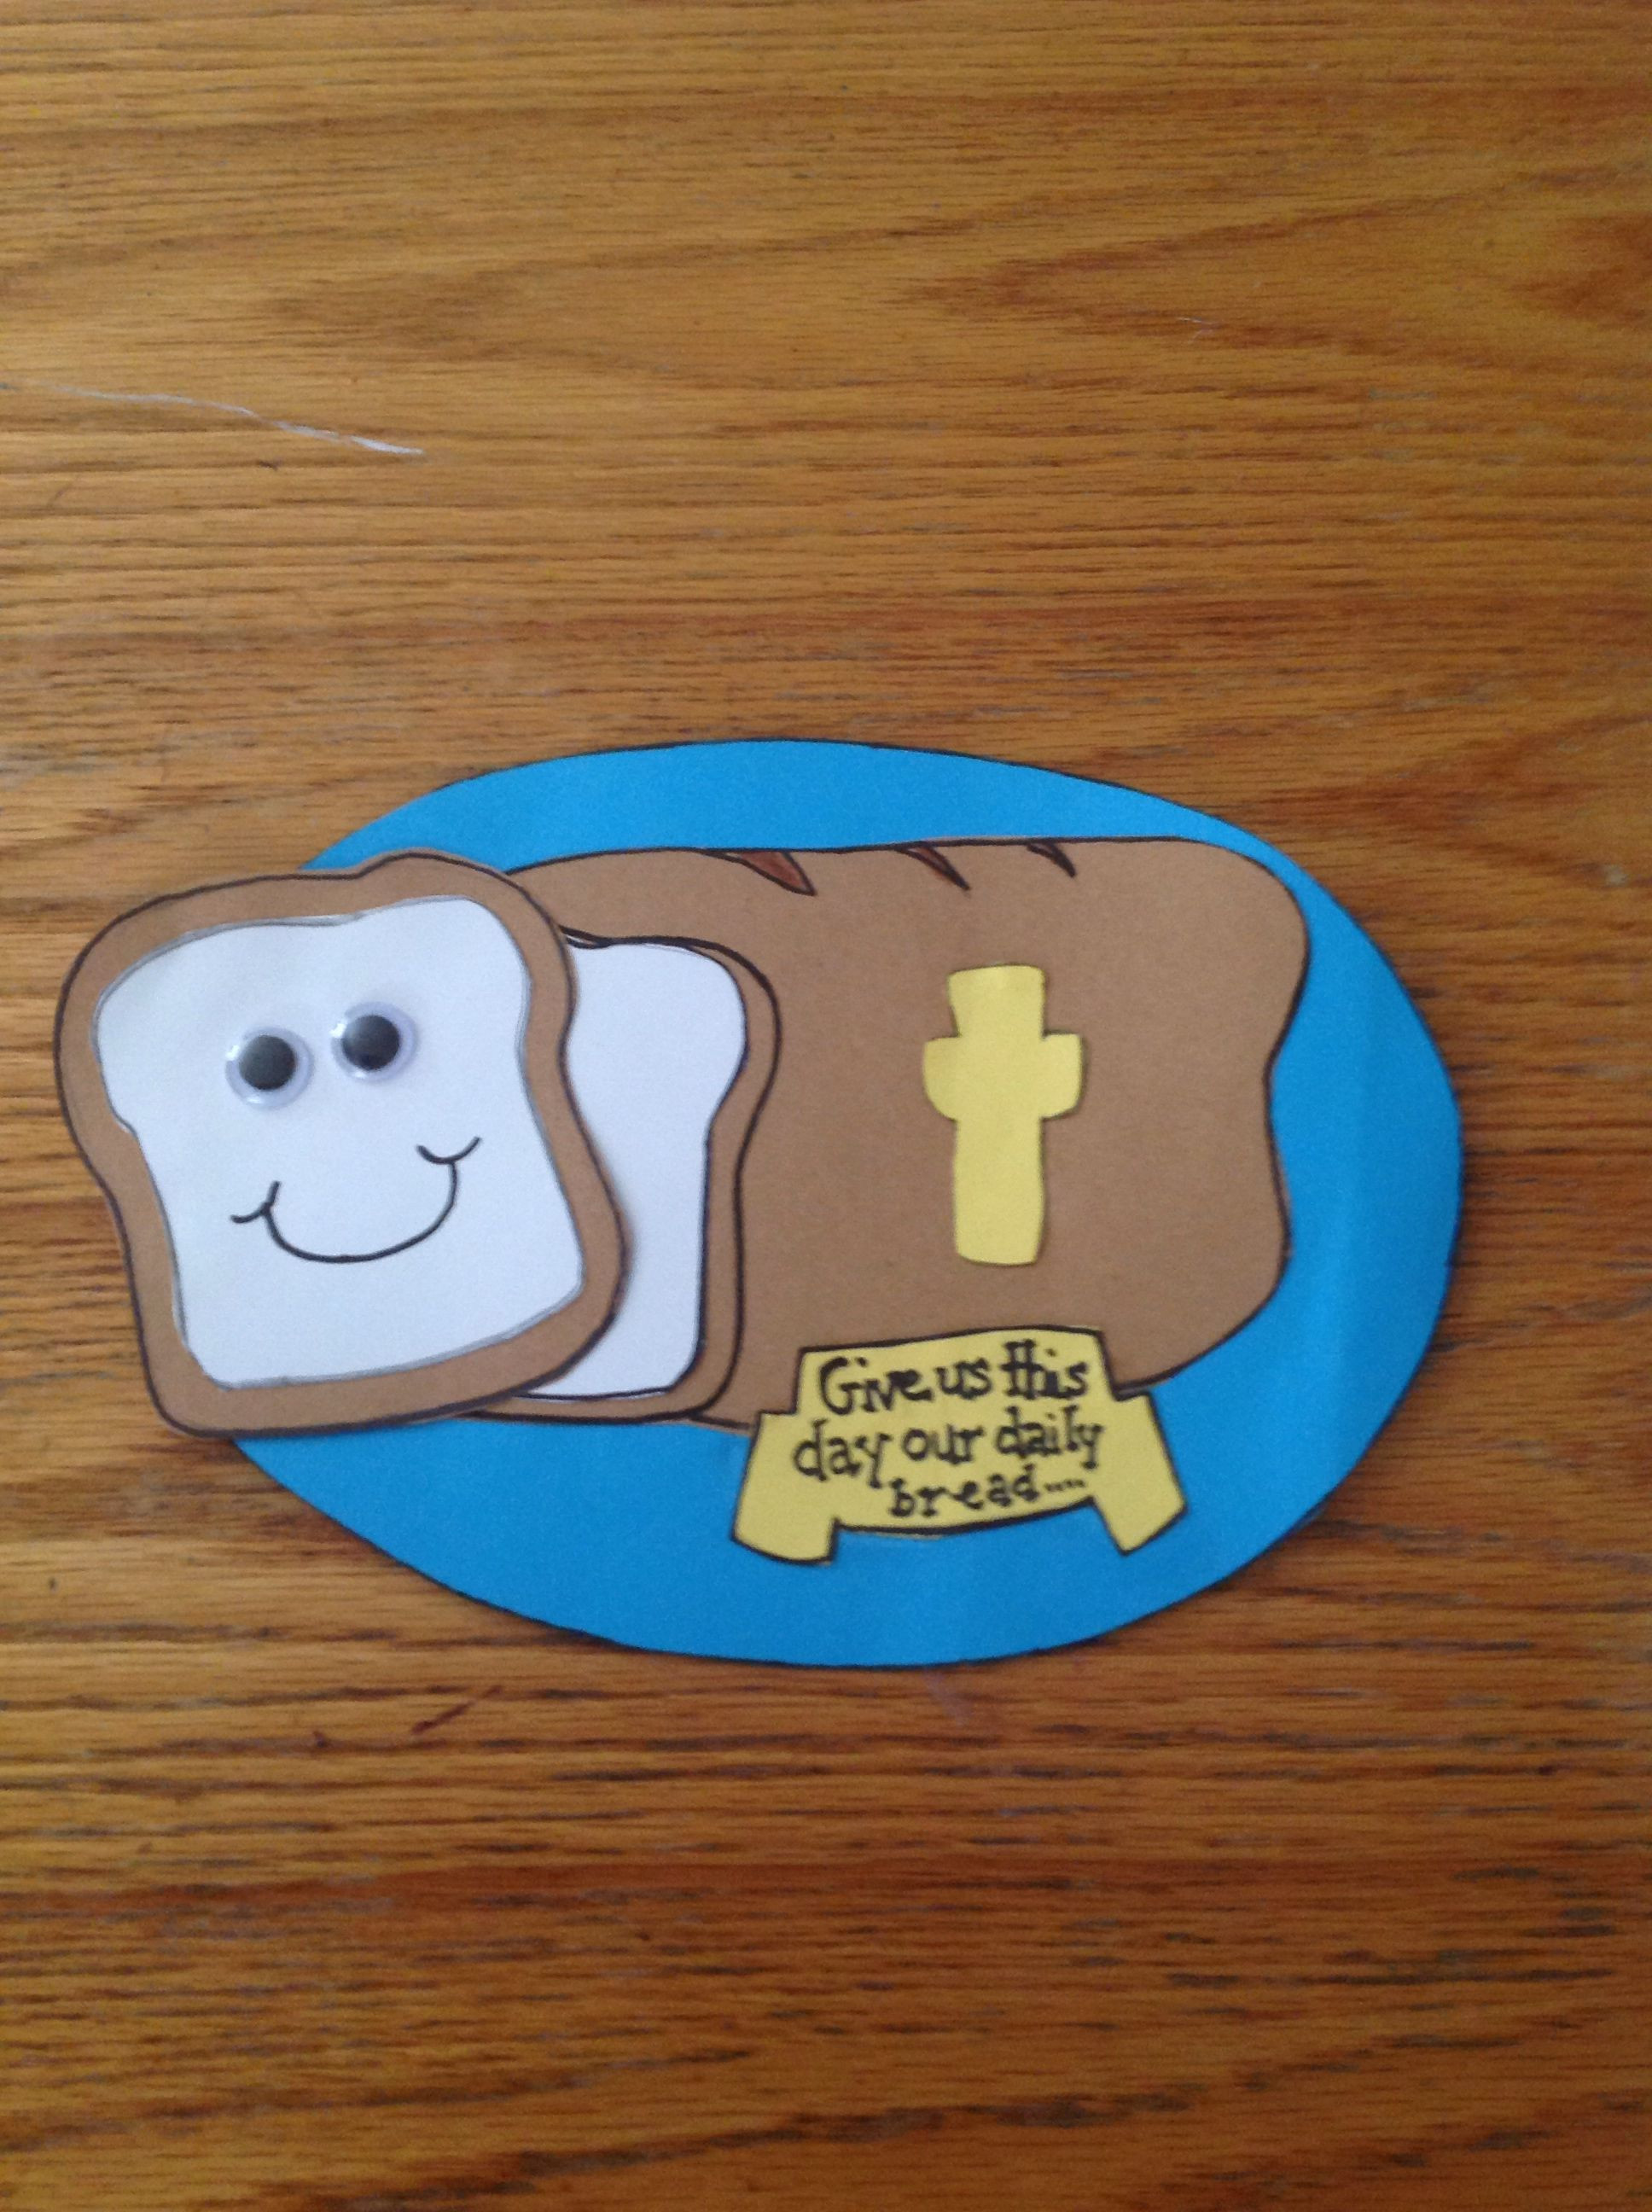 Bible Crafts For Preschoolers Free
 Our Daily Bread Bible Craft for Kids